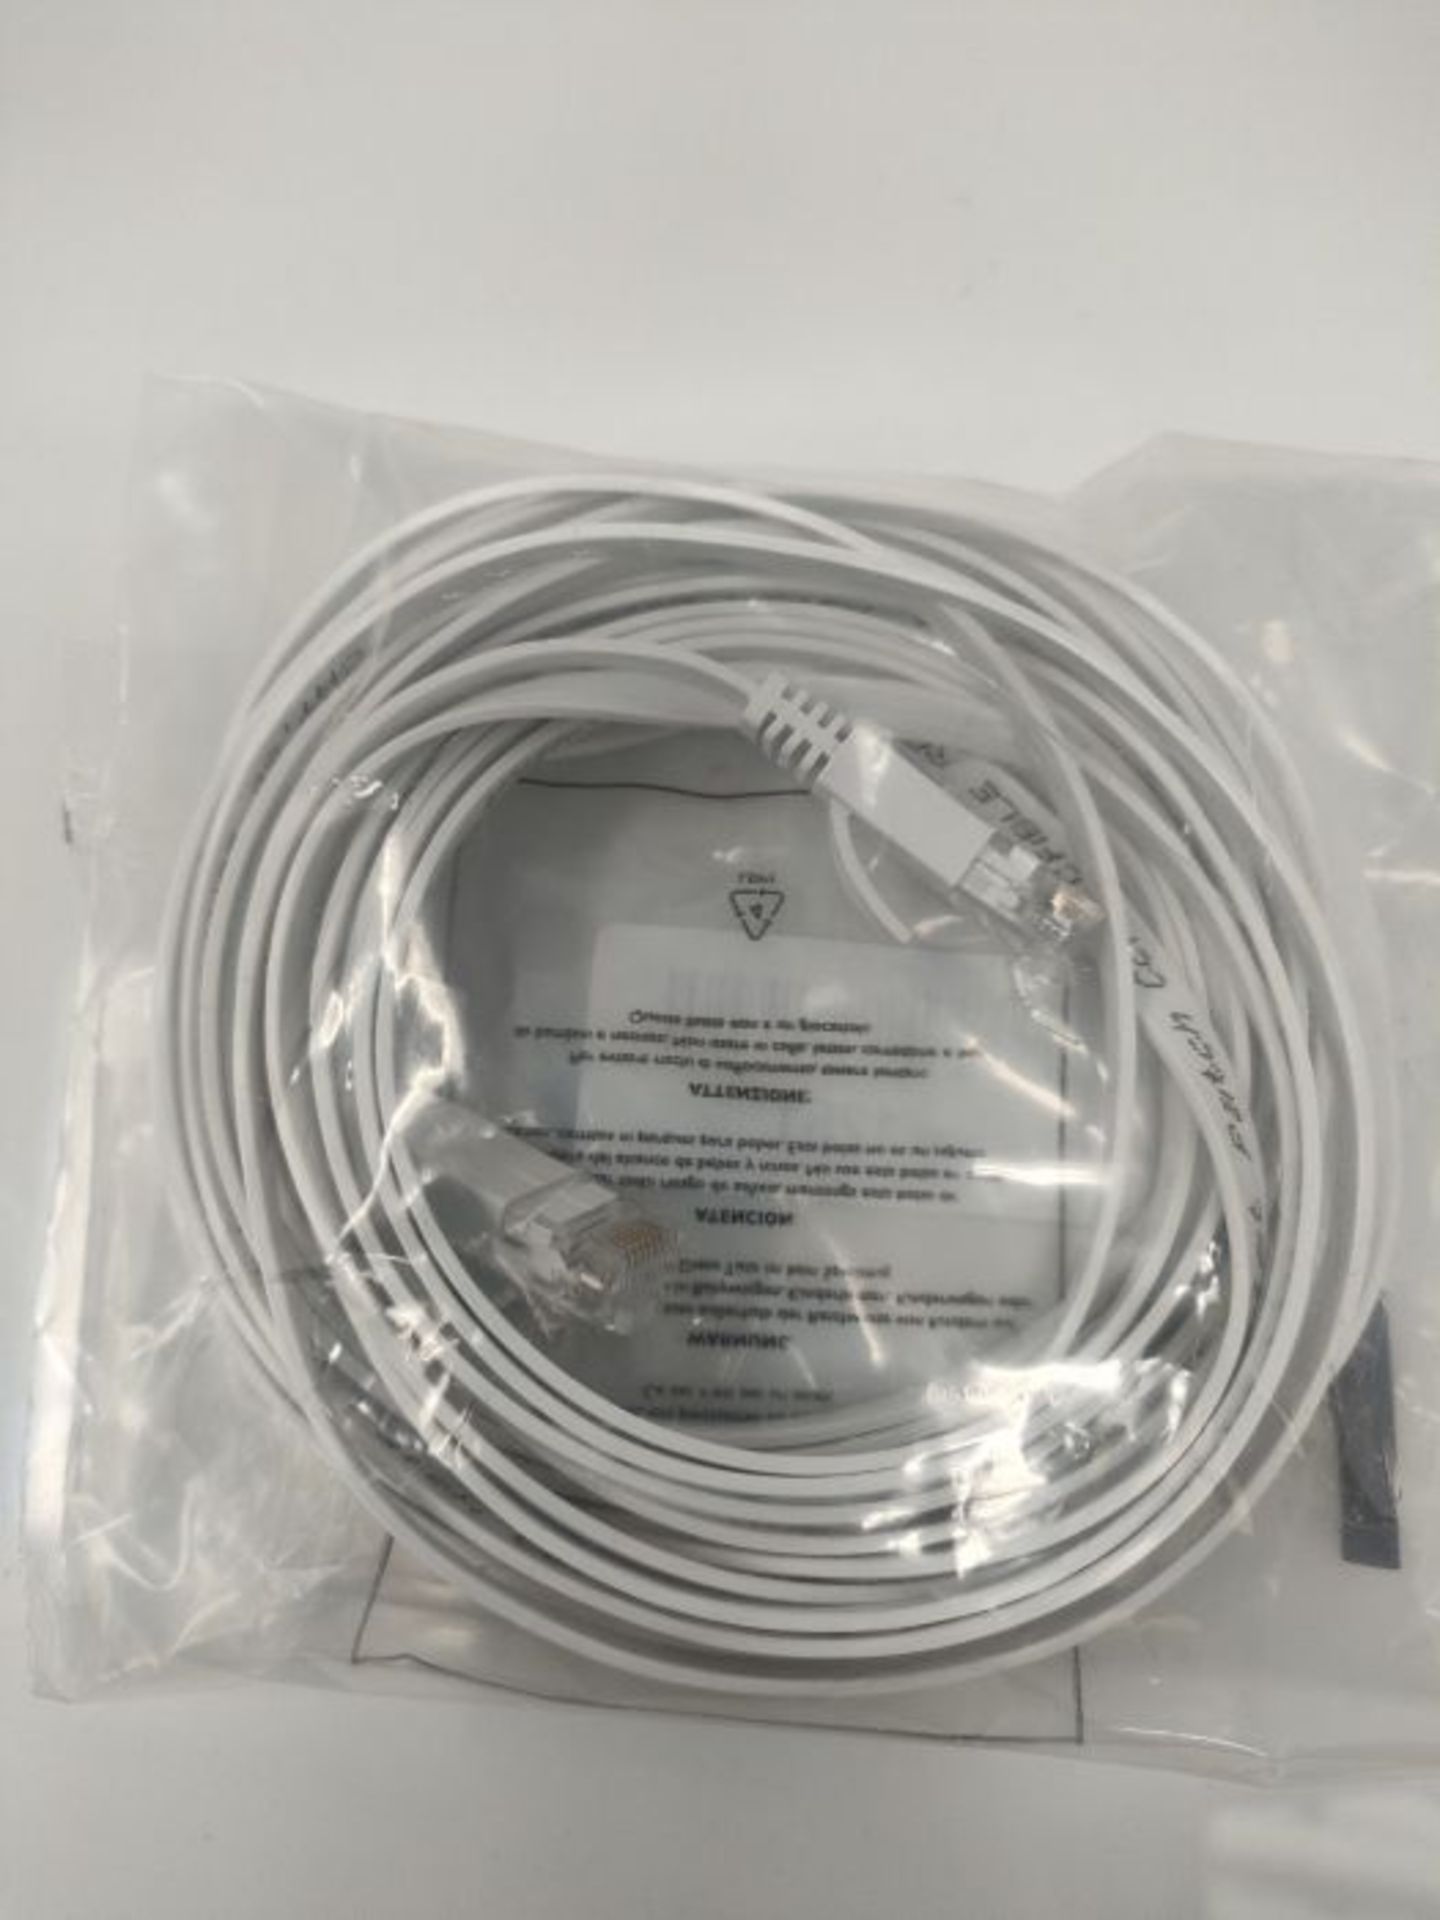 [INCOMPLETE] Lemeend Ethernet Cable 5m,Cat6 Gigabit Lan Network RJ45 High-Speed Patch - Image 3 of 3